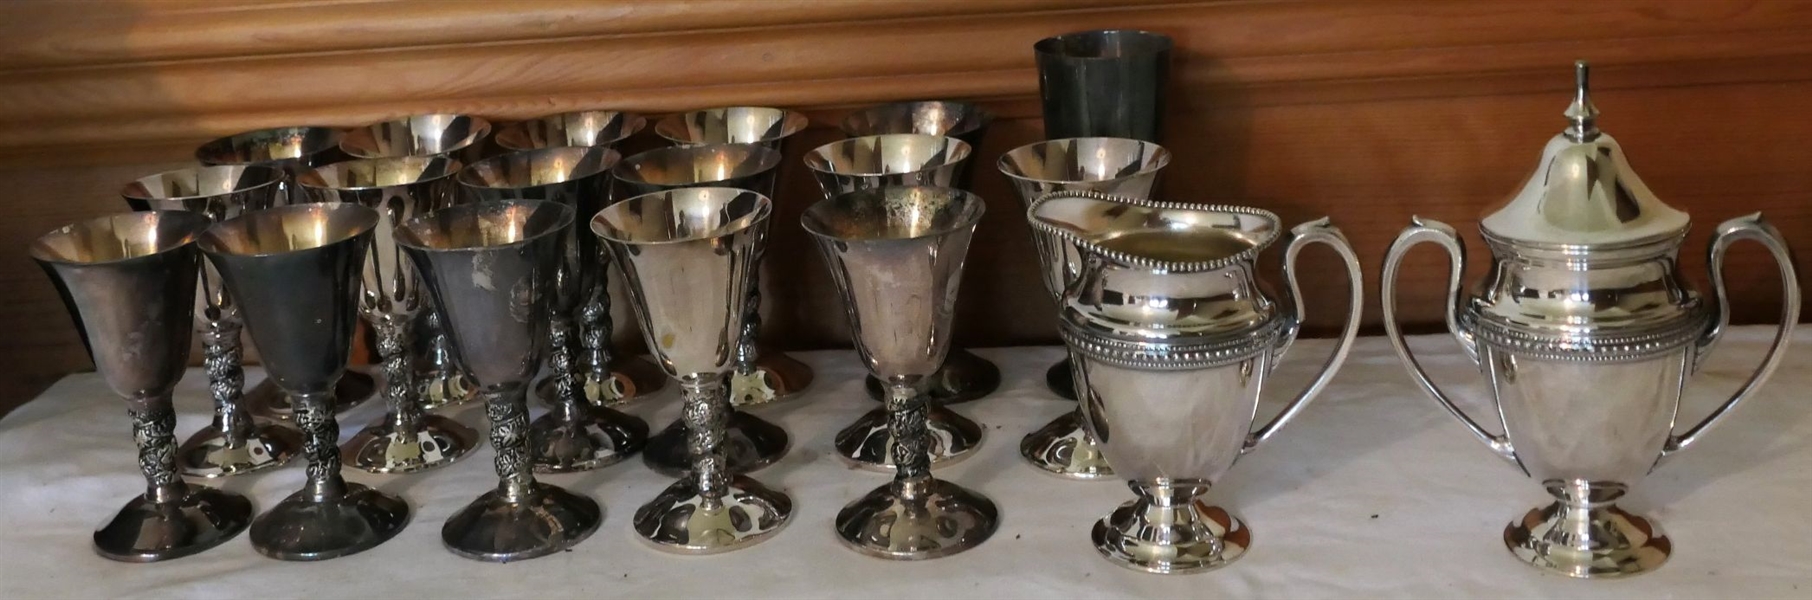 Lot of Silverplate Items including 16 Matching Footed Wines, Cream and Sugar - Wines Marked Plator Made in Spain - Each Measures 5" Tall 